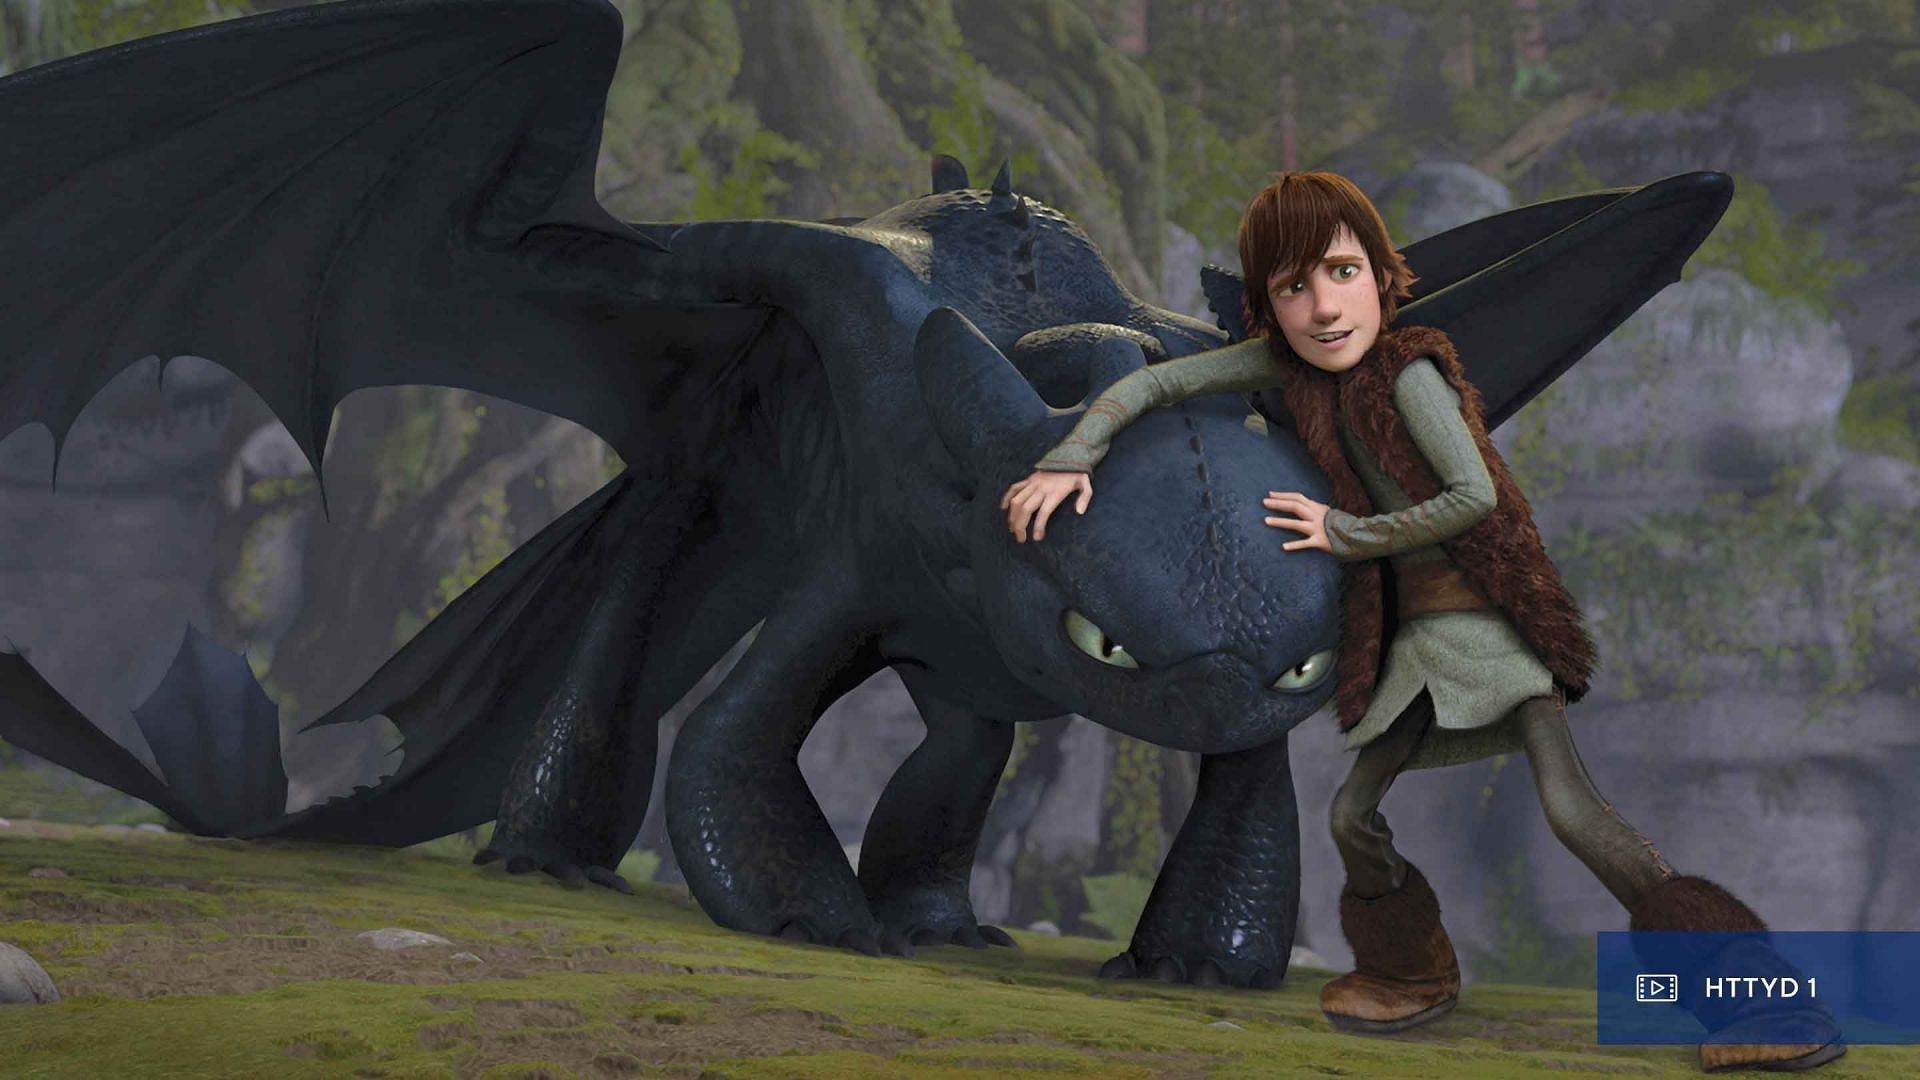 A still from How To Train Your Dragon. (Photo via DreamWorks)